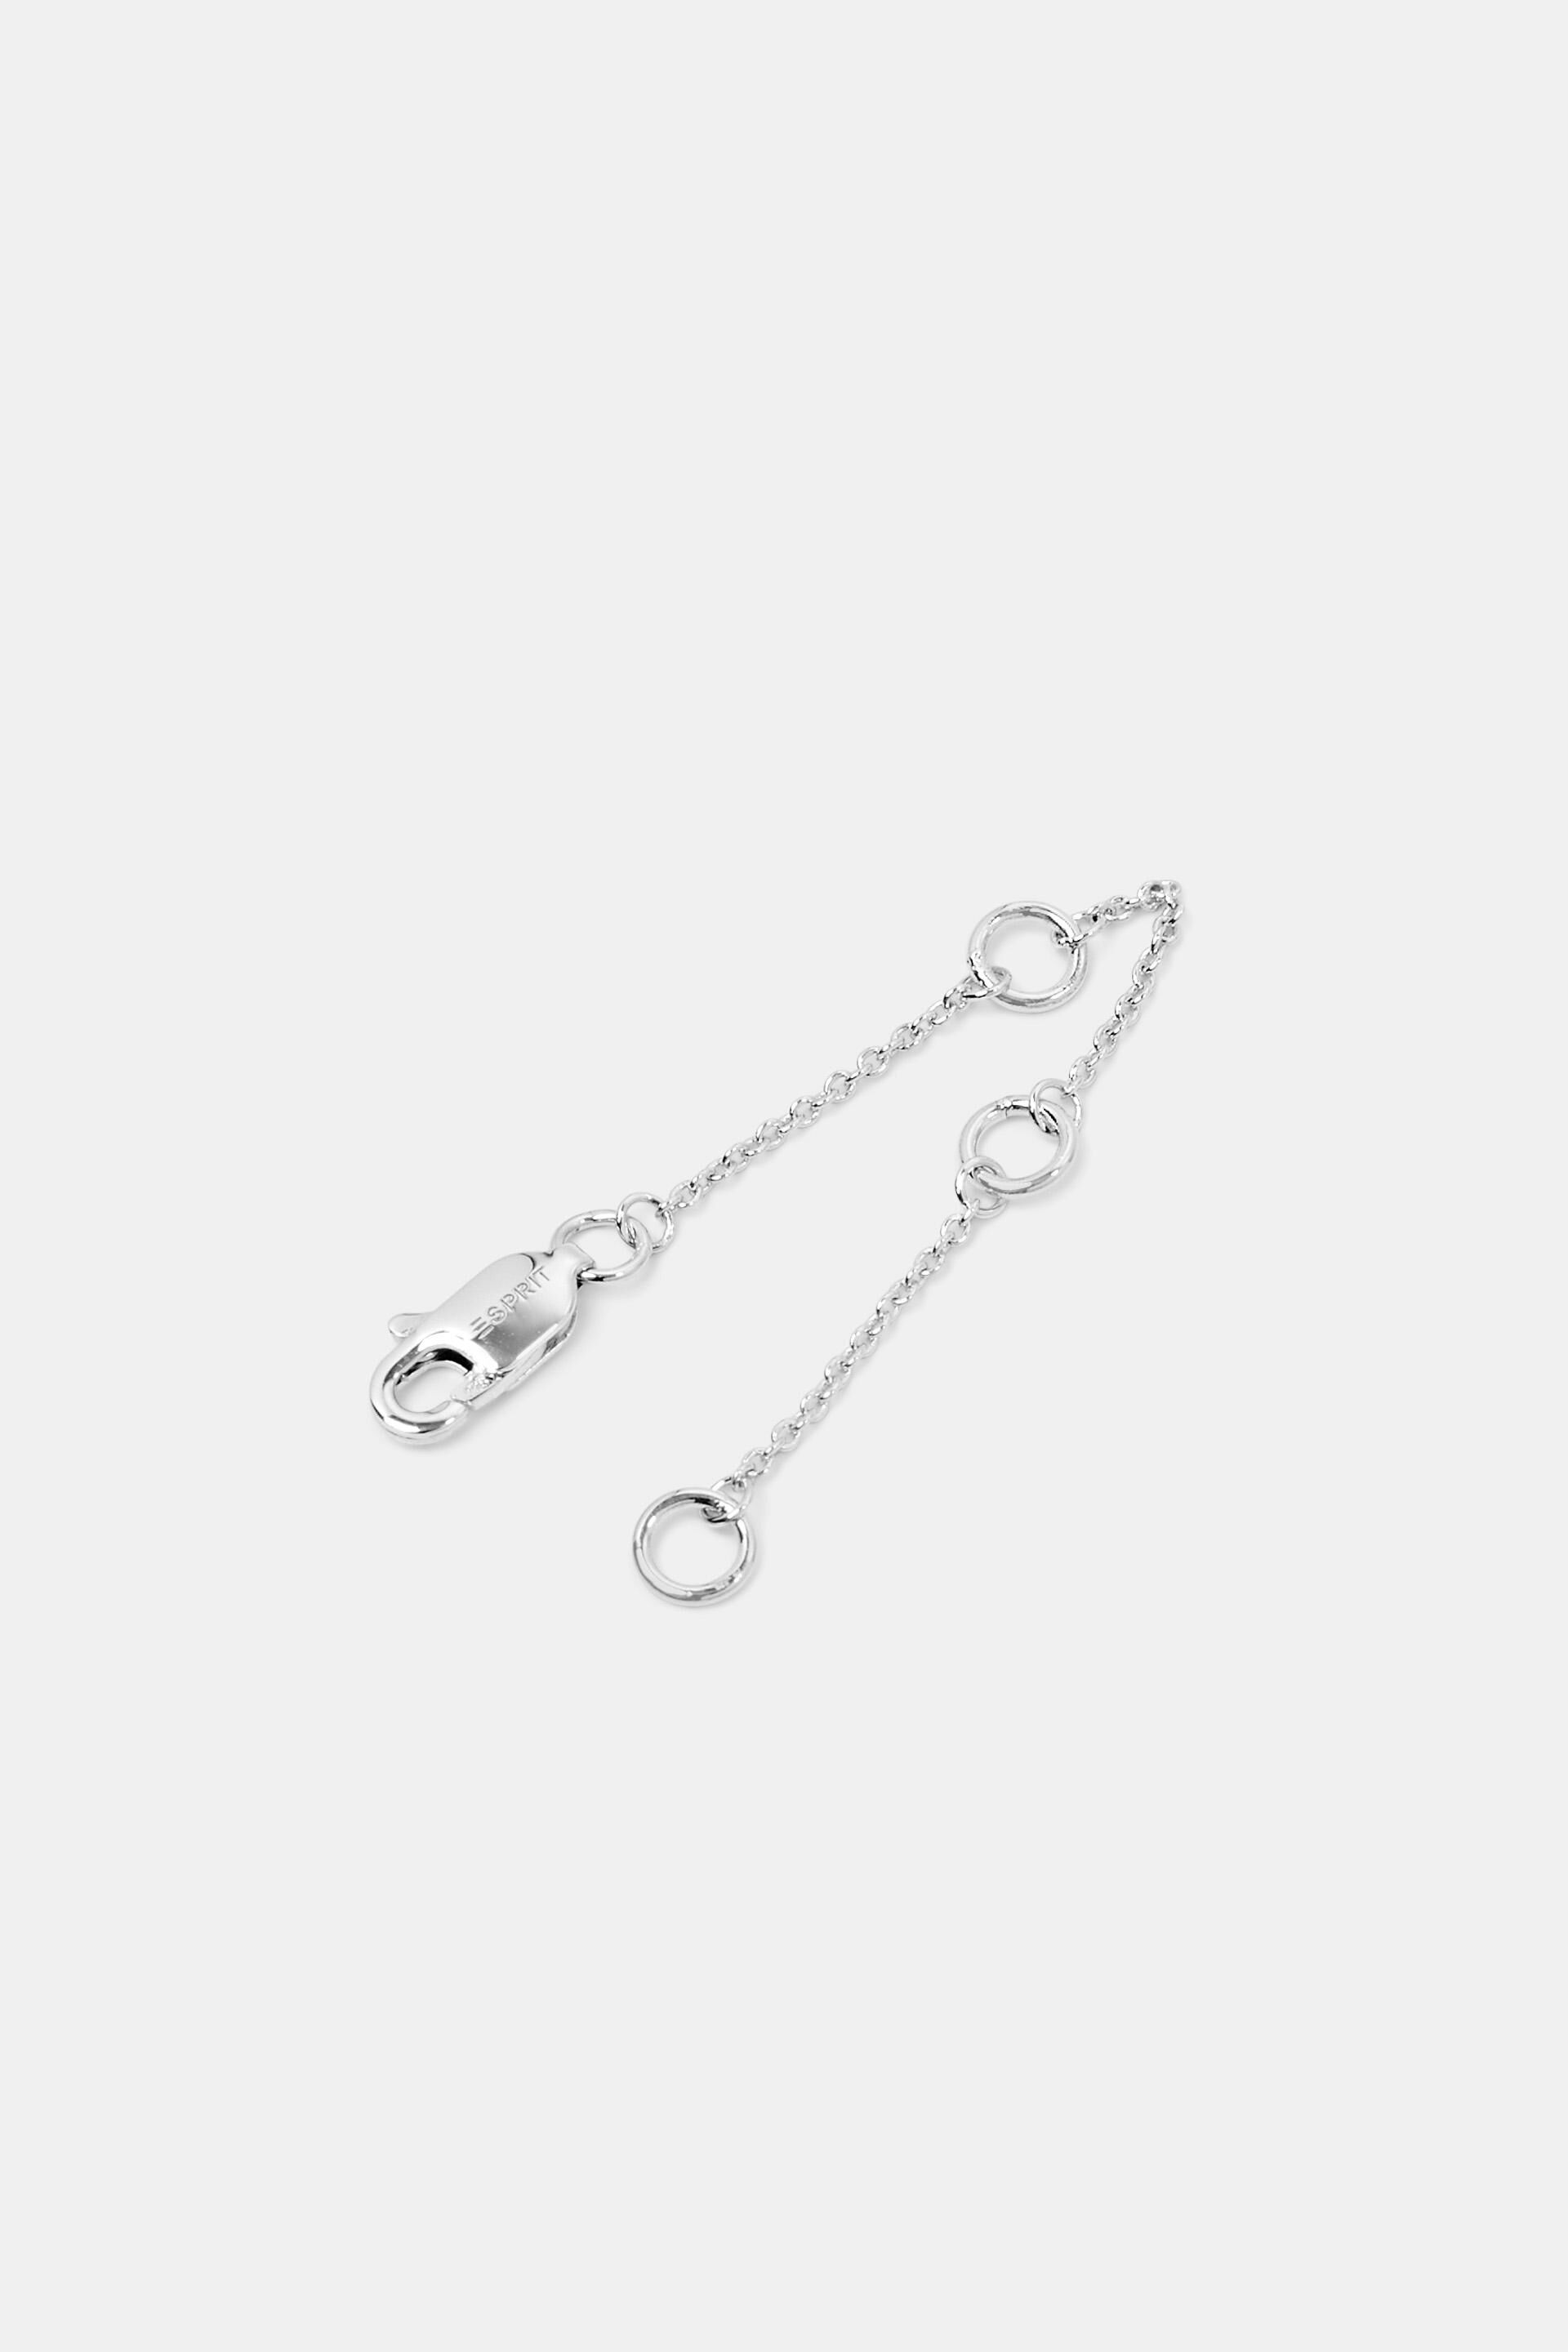 50 Pcs, 5 Inch Brass Link Chain Extender Silver at Rs 250 | Link Chains |  ID: 26394800888